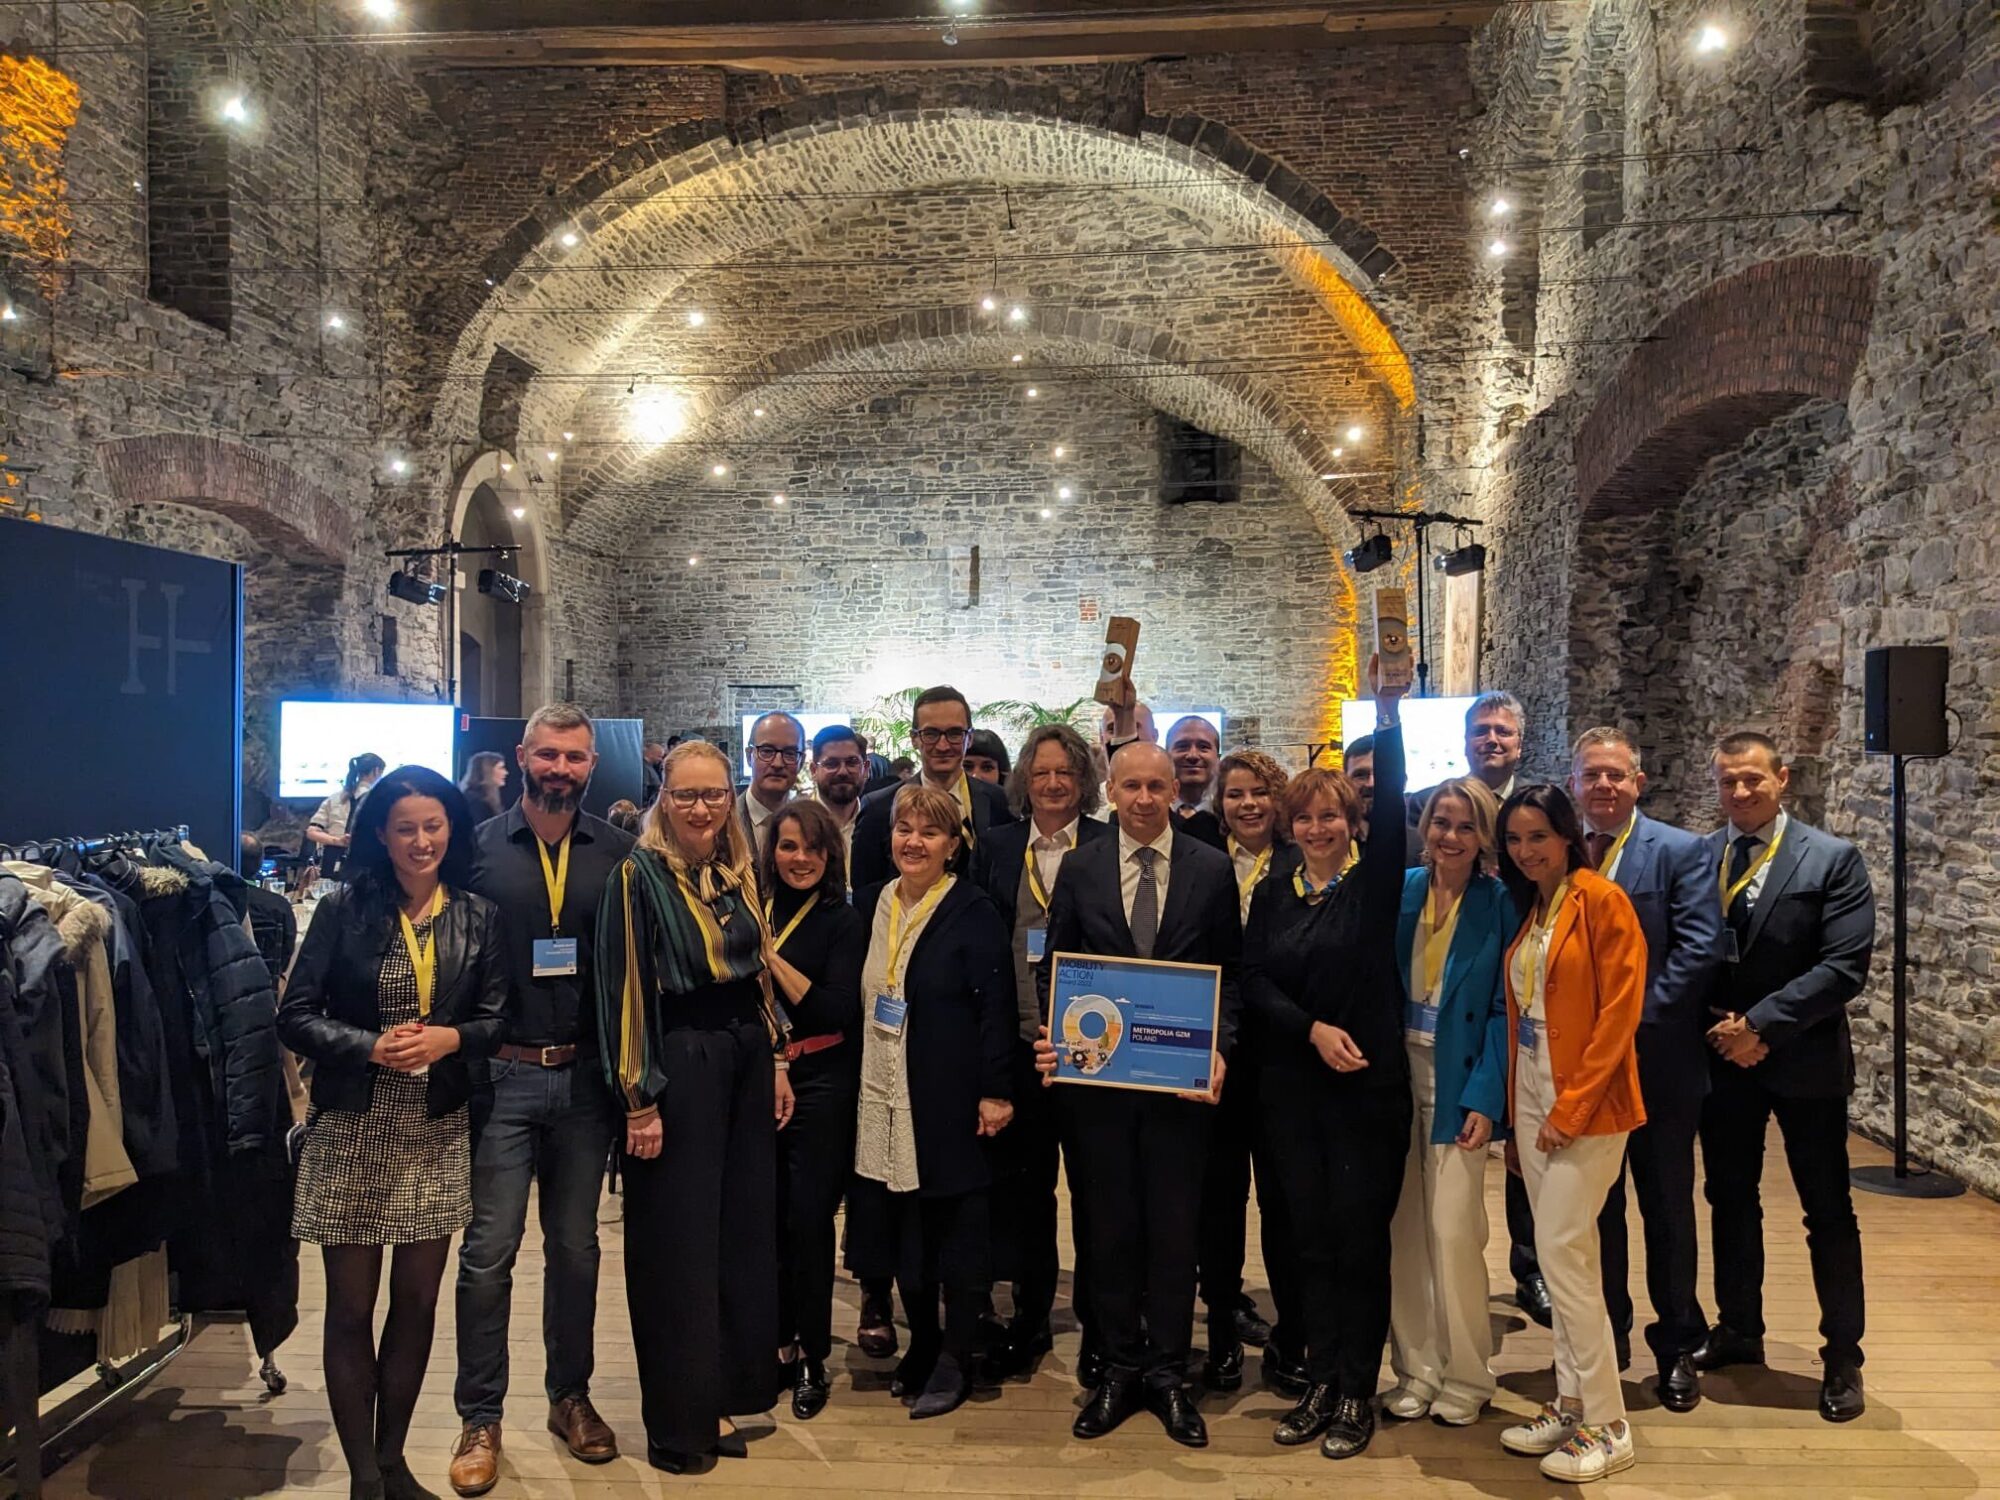 EUROPEANMOBILITYWEEK announces winners of its two mobility awards